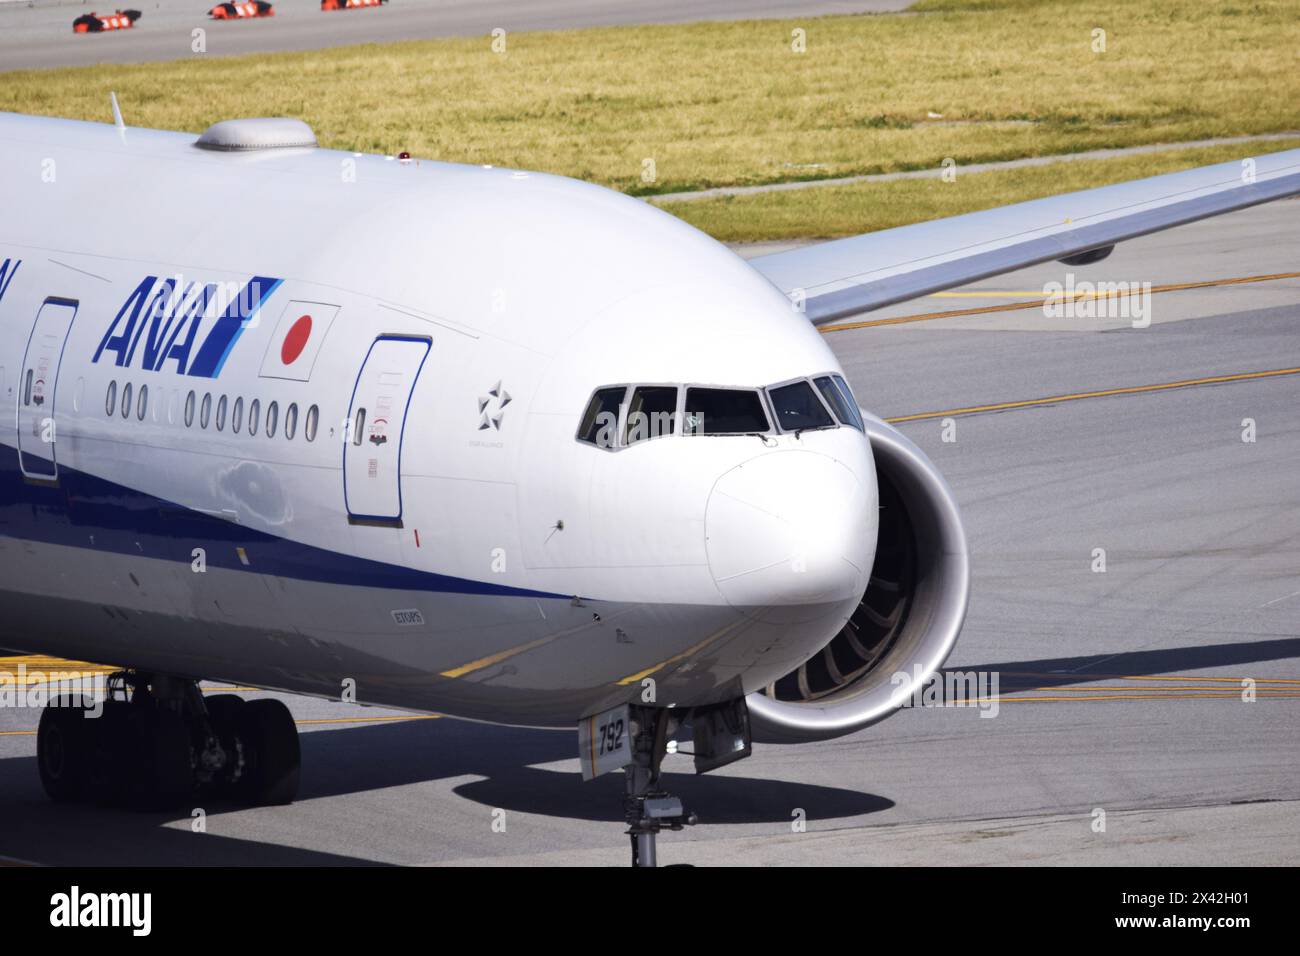 ANA Boeing 777-300 taxiing Stock Photo